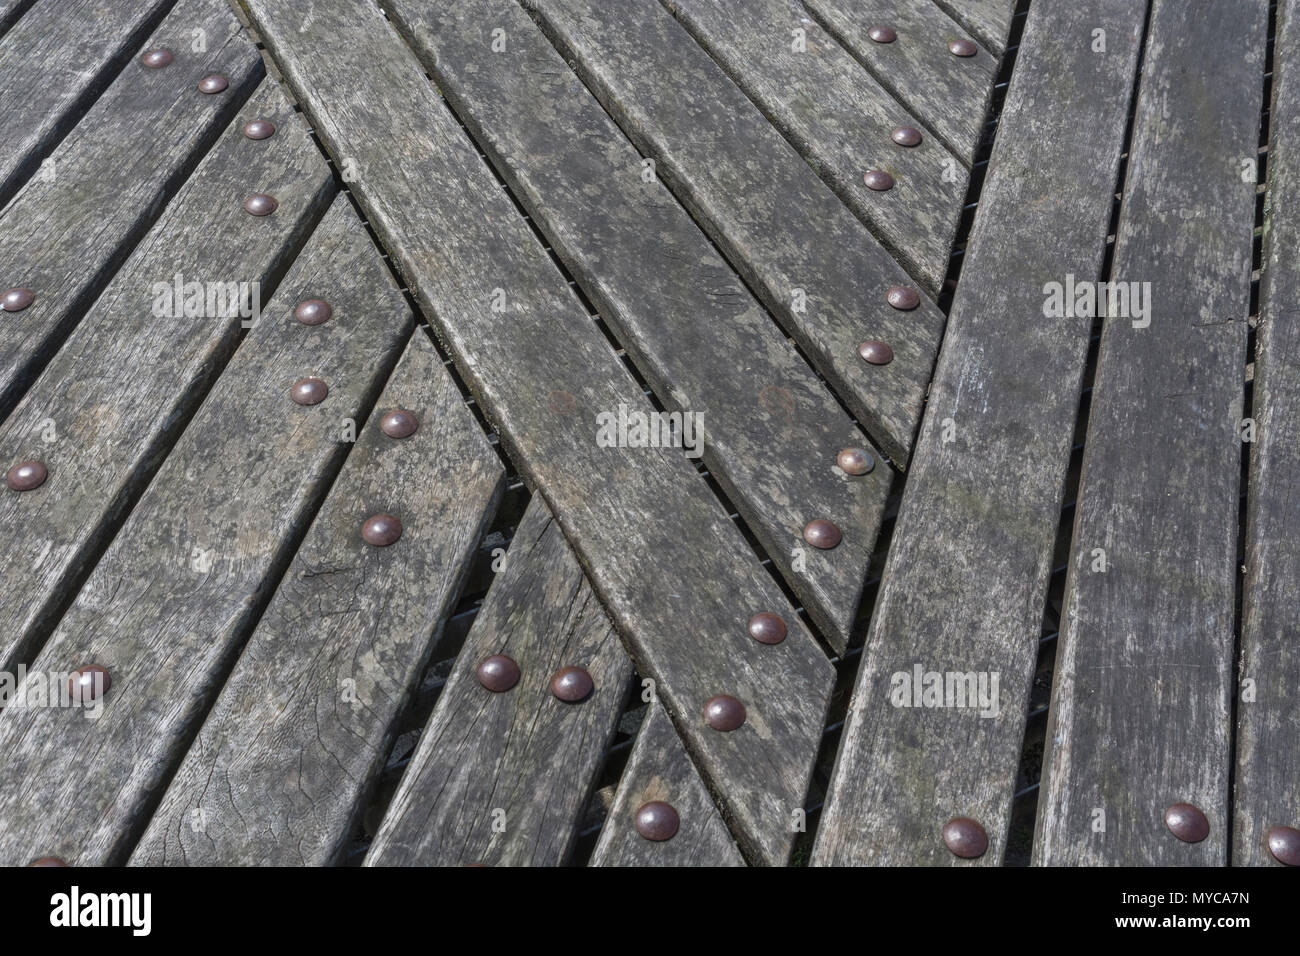 Close detail of the wooden slats forming some public seating at Lemon Quay, Truro, Cornwall. Stock Photo